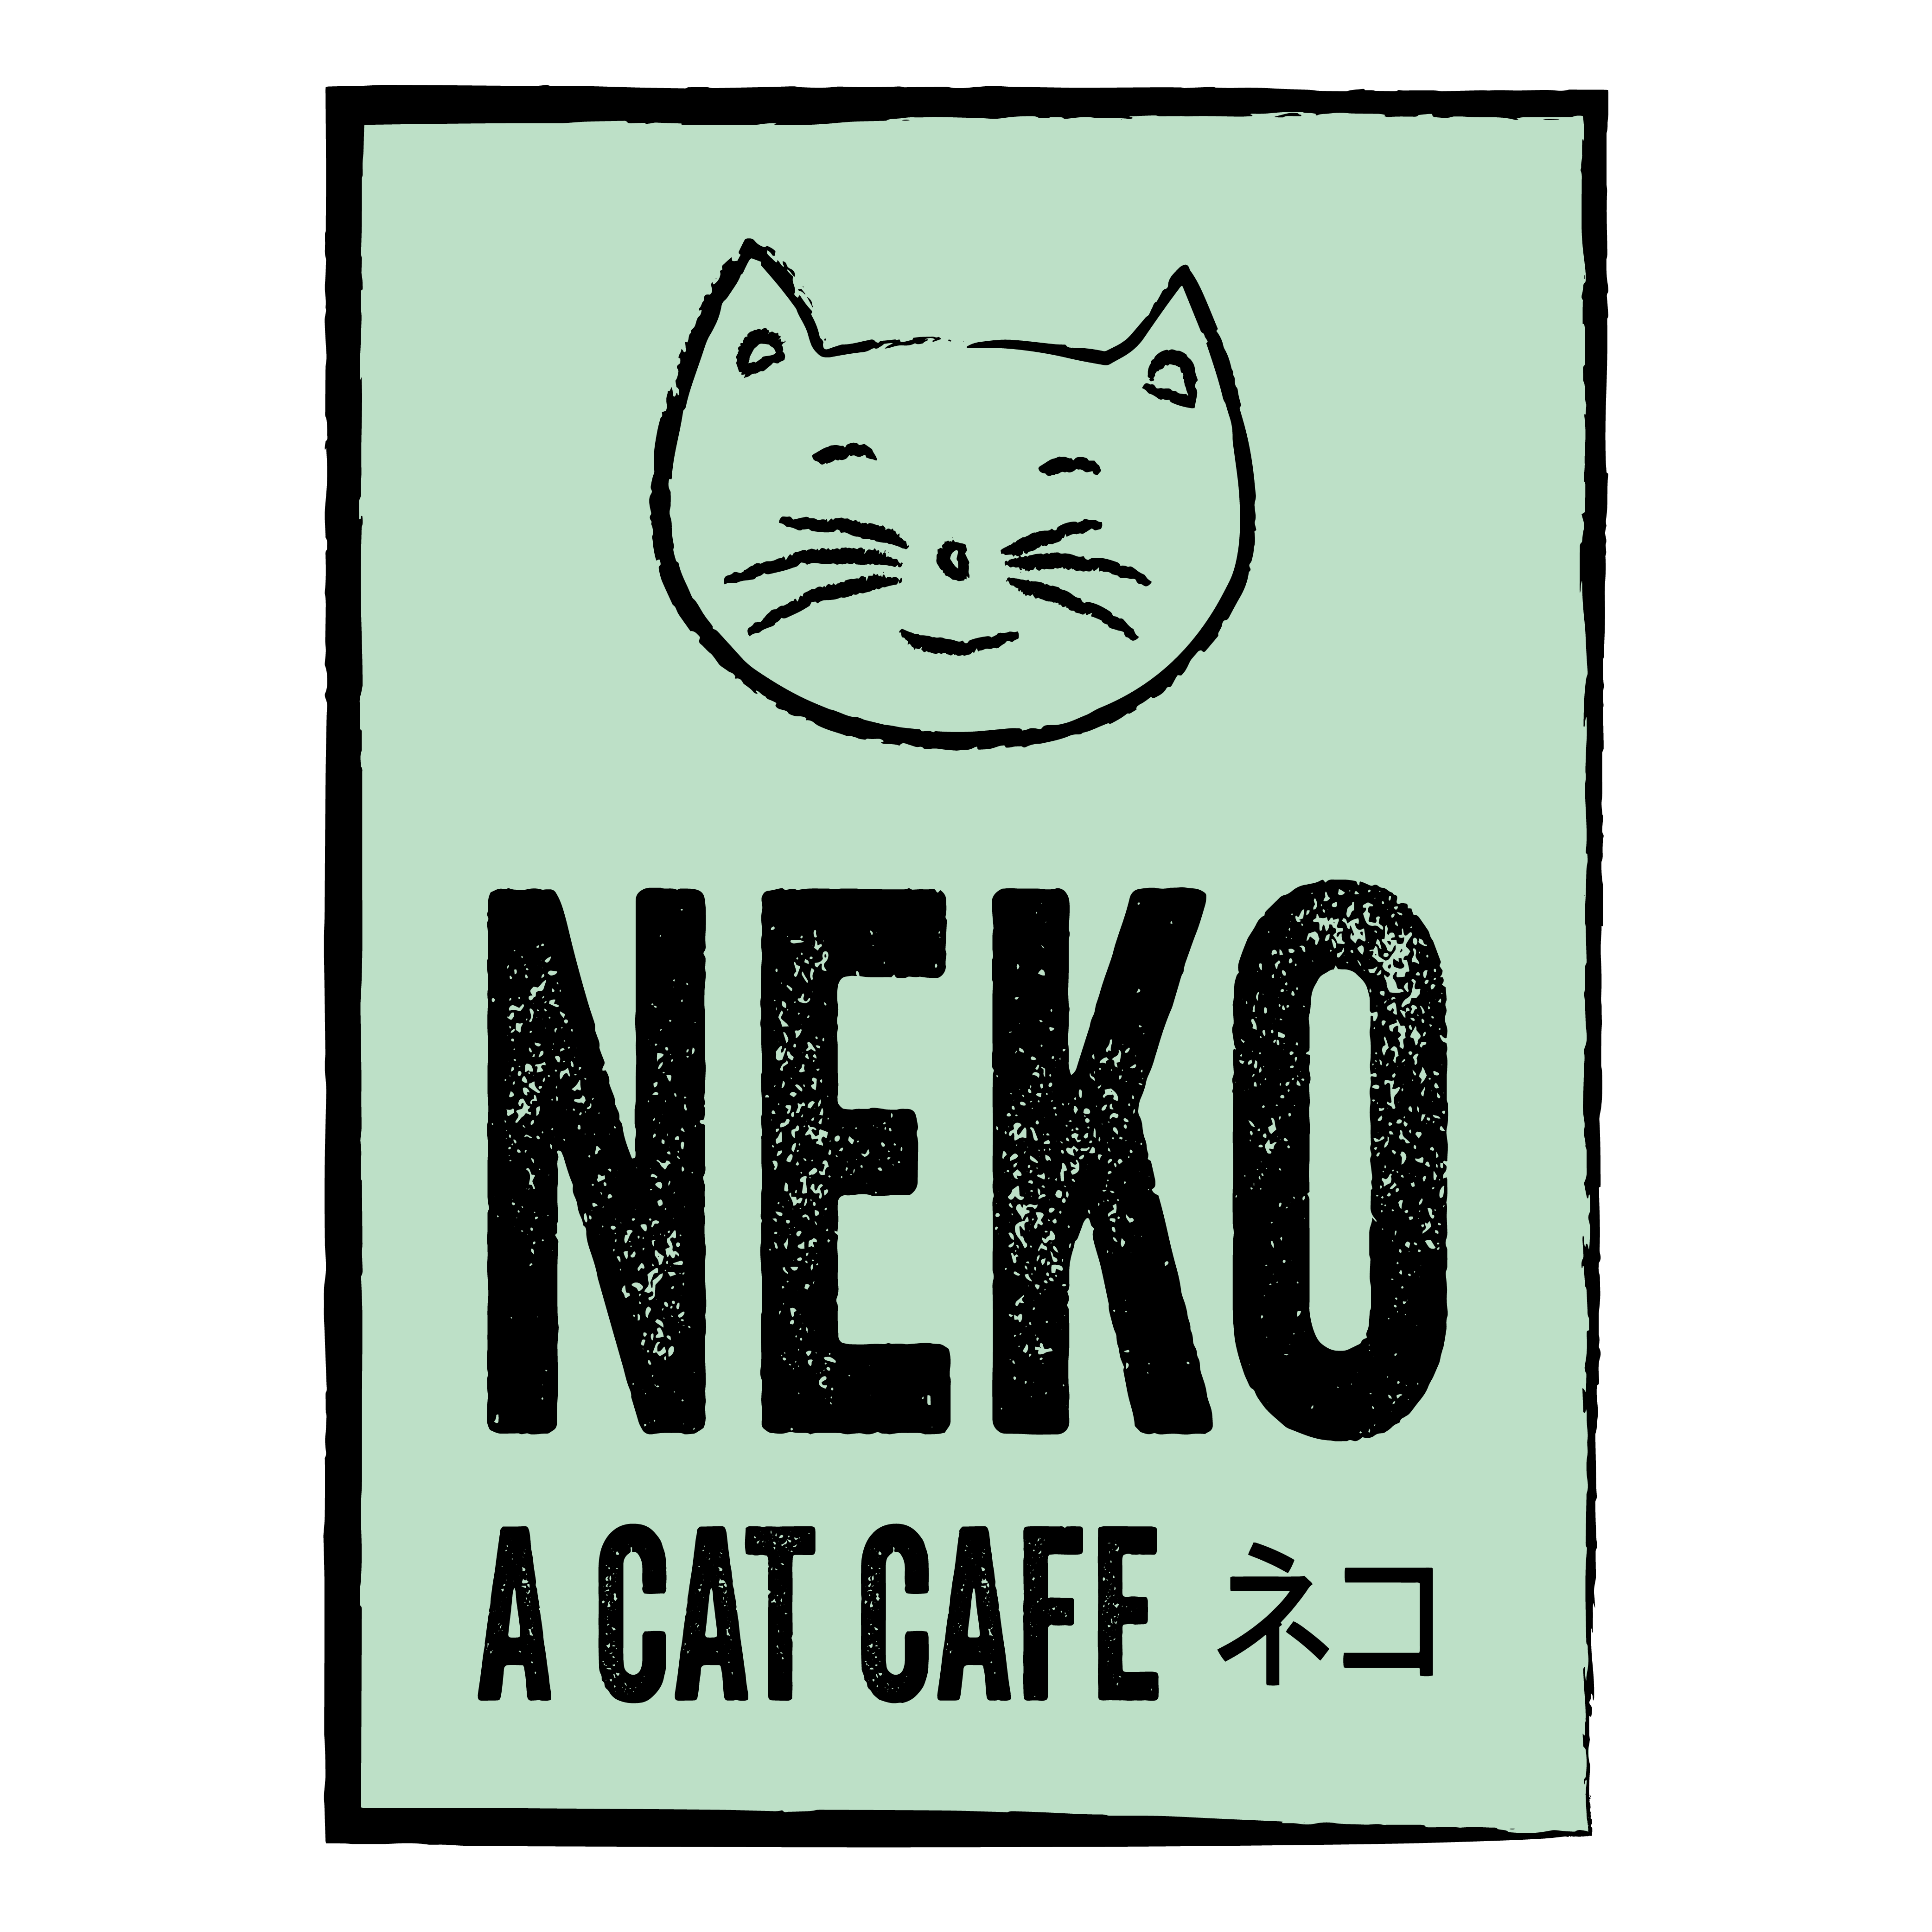 Neko: A Cat Cafe logo in black text on a light green background with a cute pencil sketch of a cat face